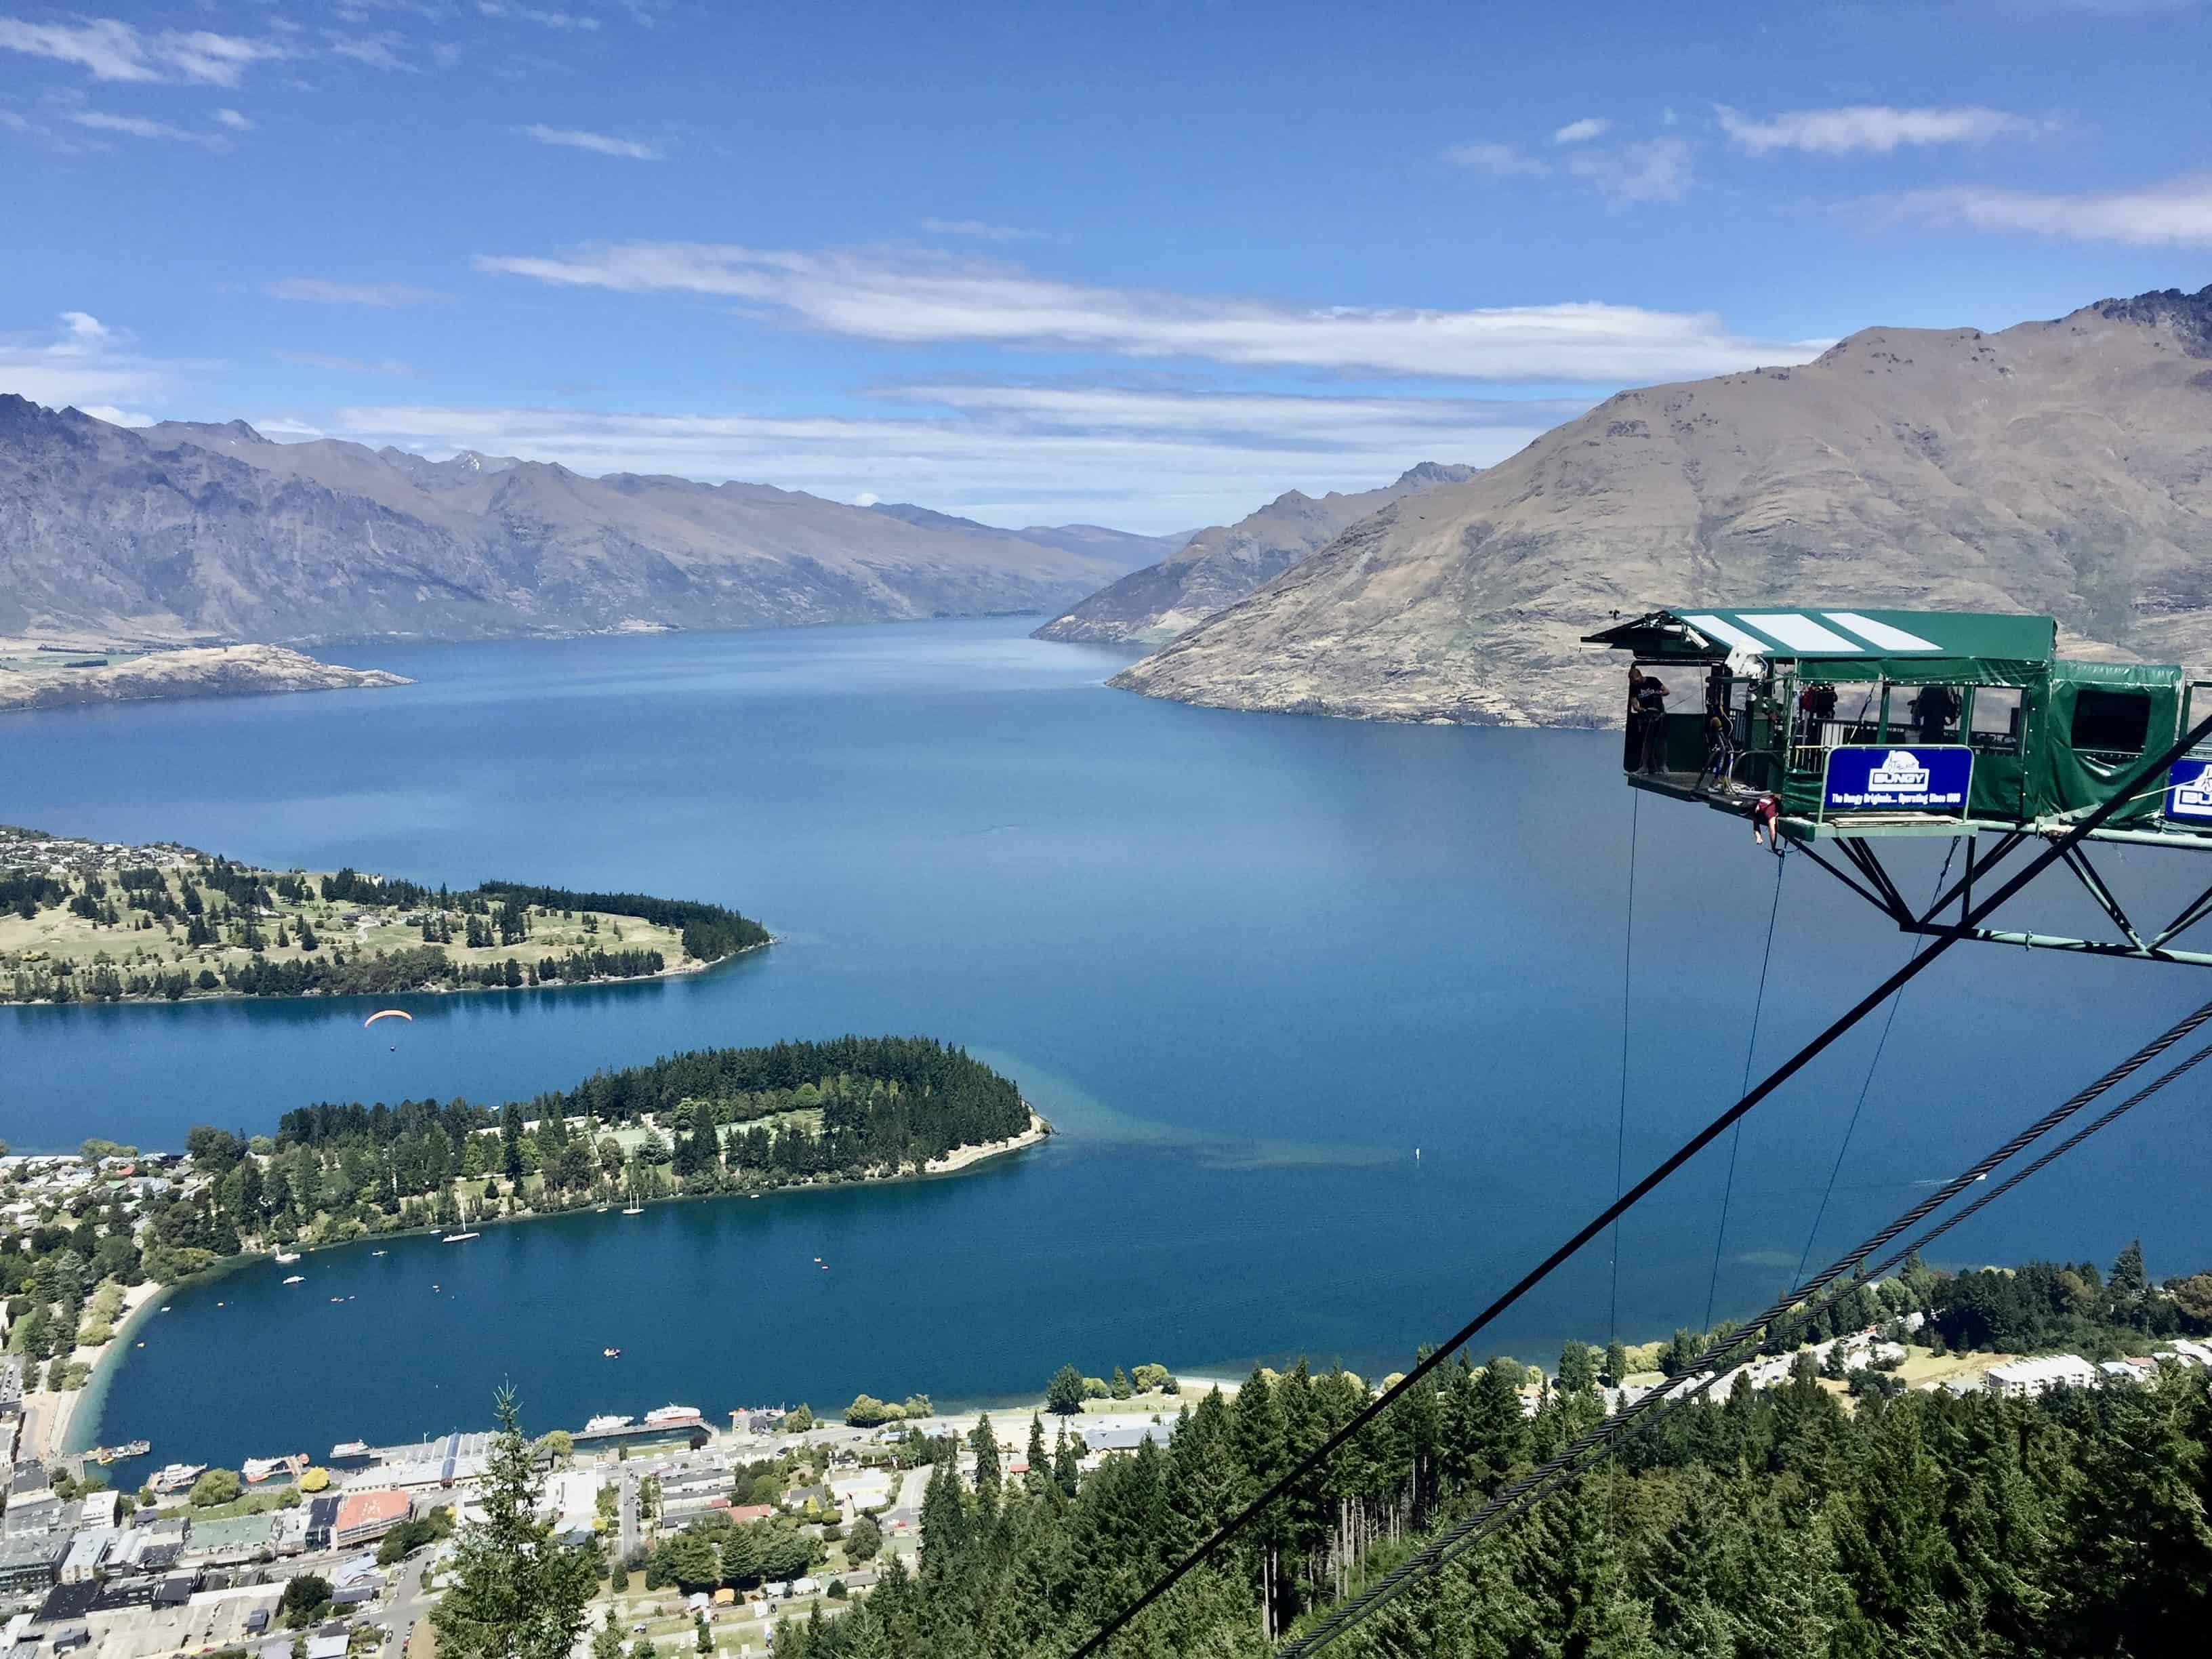 The Ledge Bungy has the best views